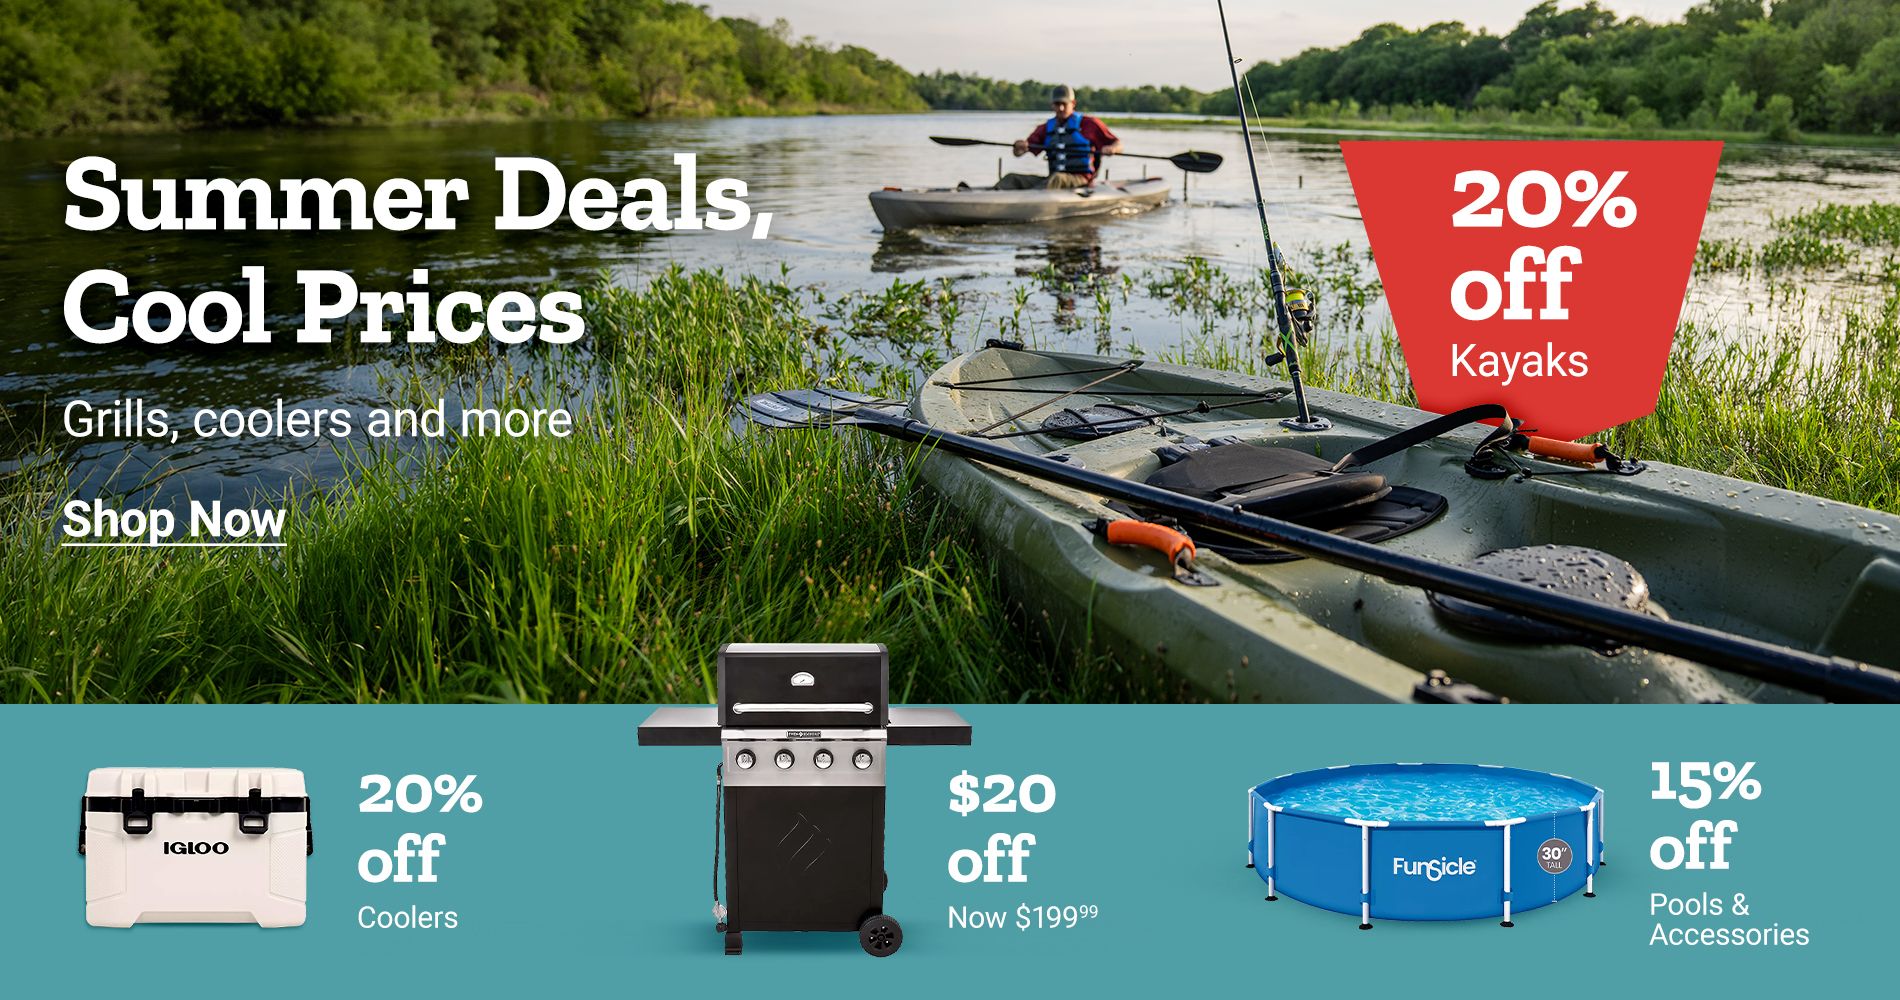 Summer Deals, Cool Prices - Grills, coolers and more. Shop Summer essentials